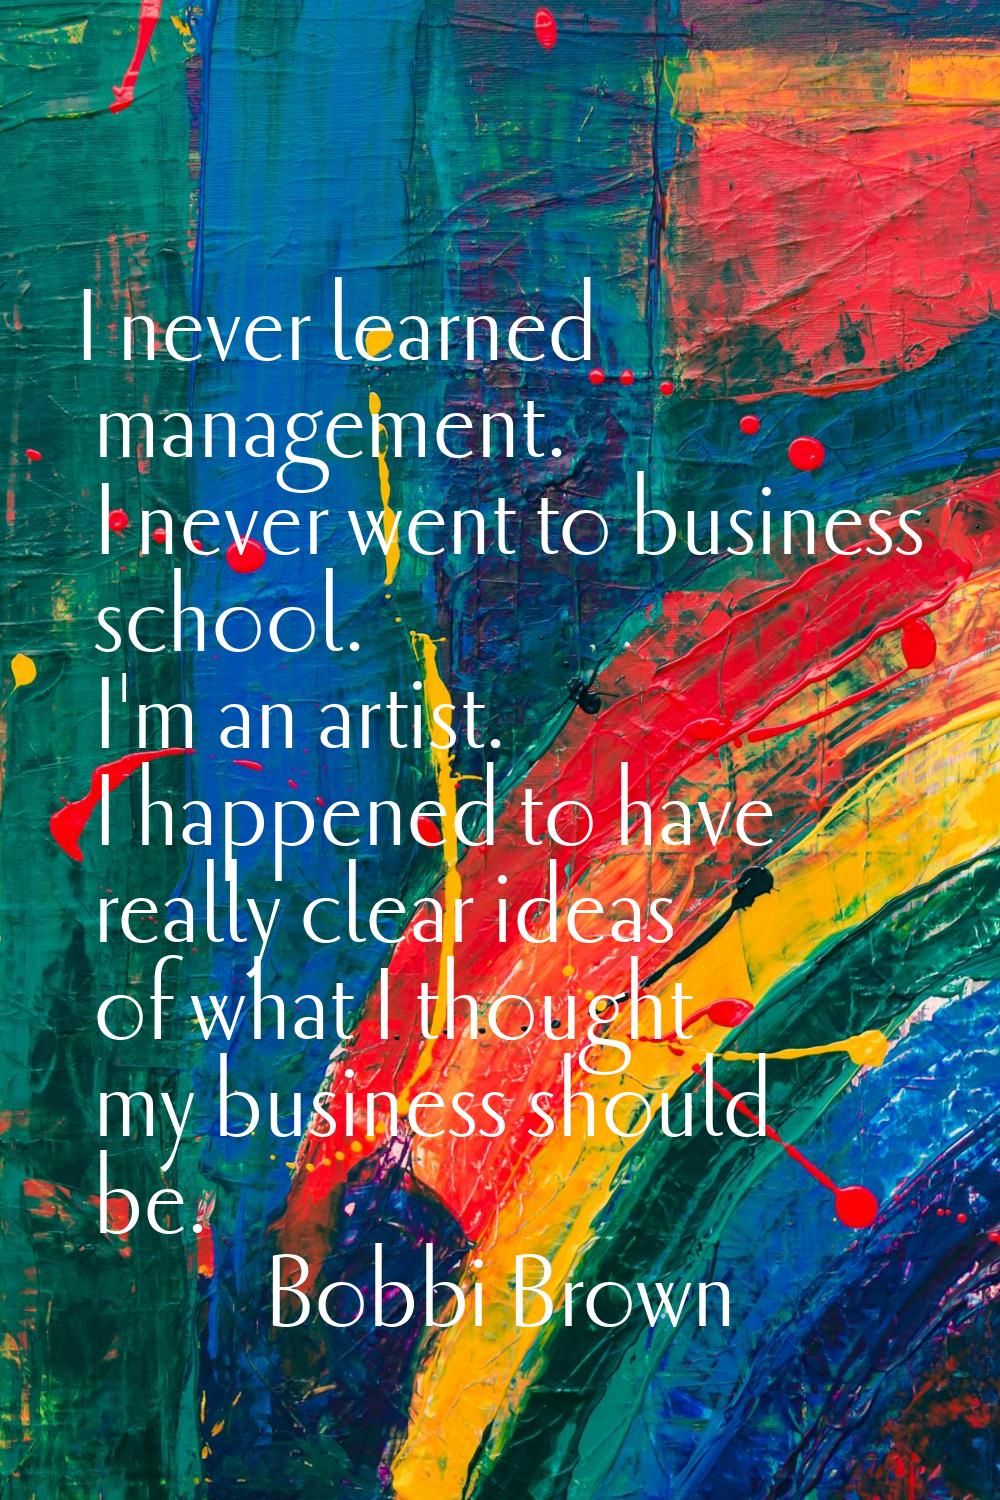 I never learned management. I never went to business school. I'm an artist. I happened to have real